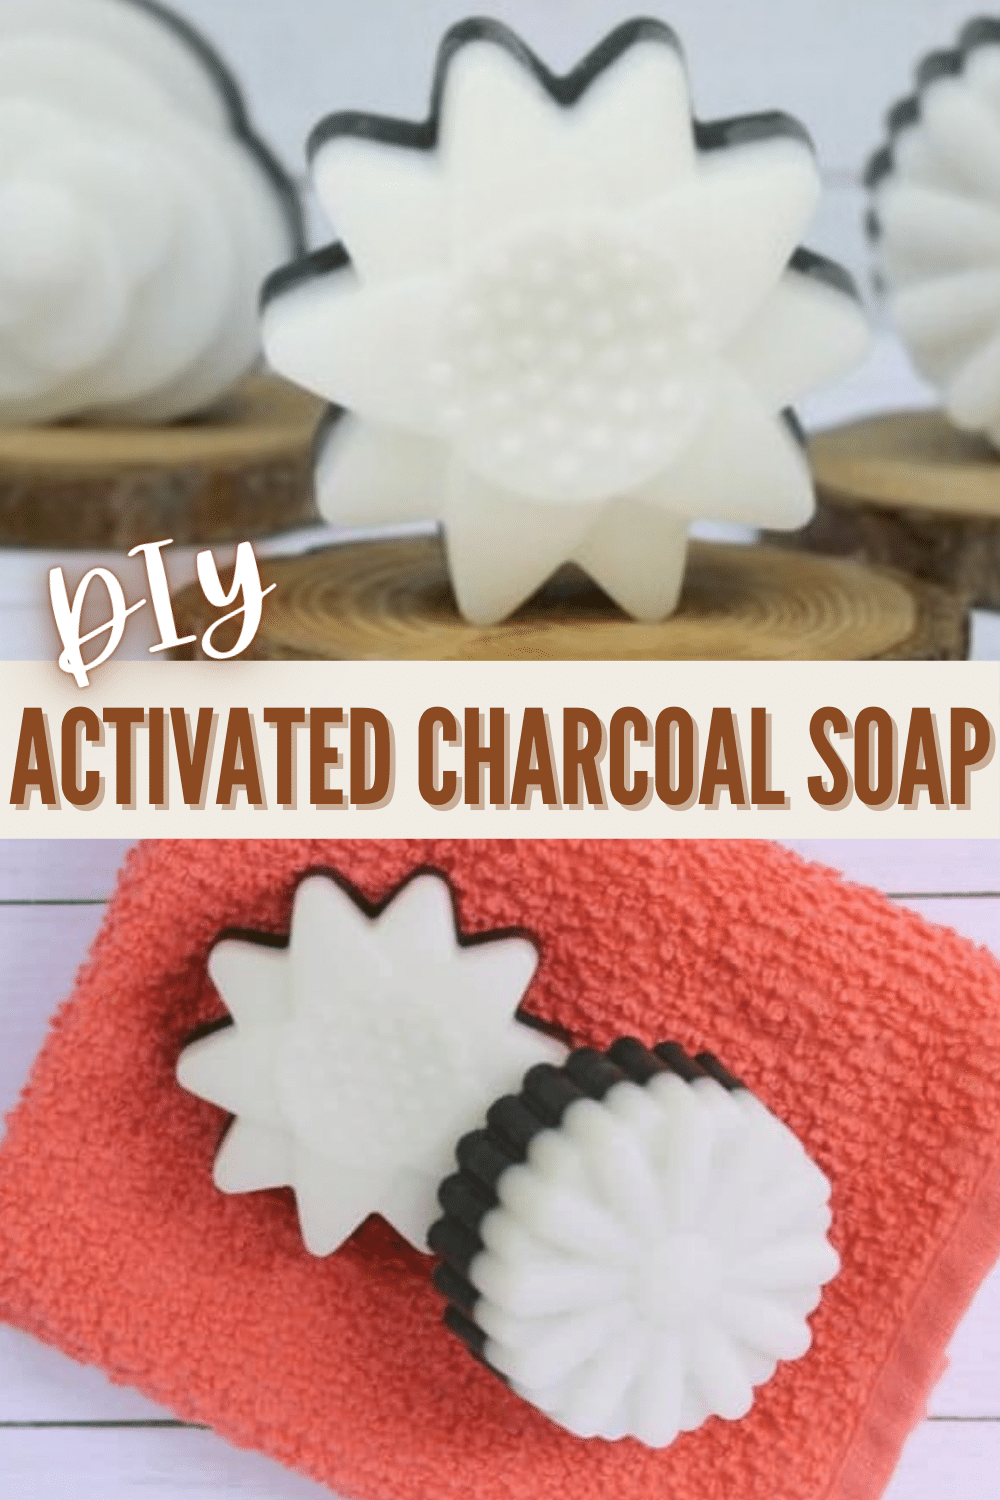 Making your own Activated Charcoal Soap at home is easy with this simple DIY tutorial. These homemade soaps also make great gifts. #diybeauty #charcoalsoap #homemade via @wondermomwannab